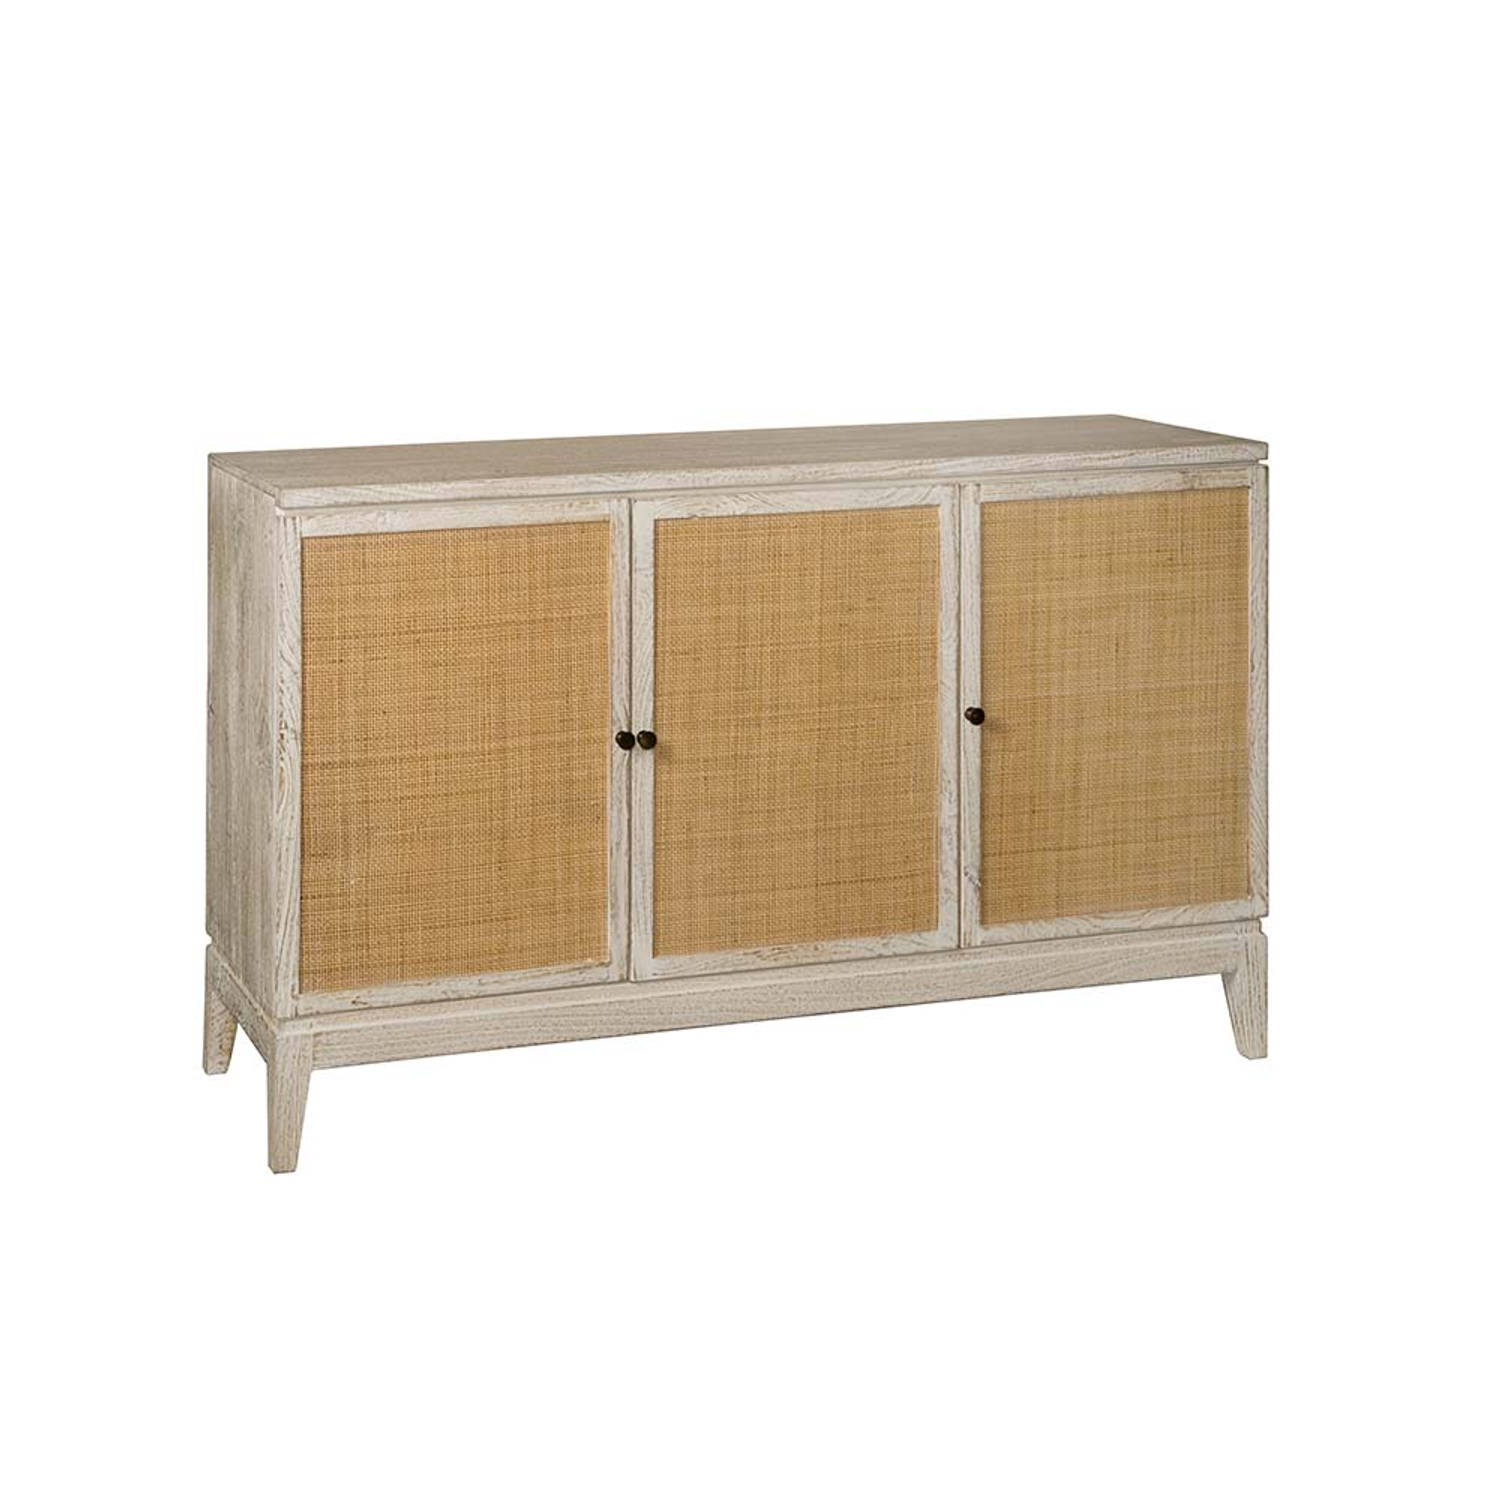 TOFF Vincenza 3-drs sideboard - 150x45x90